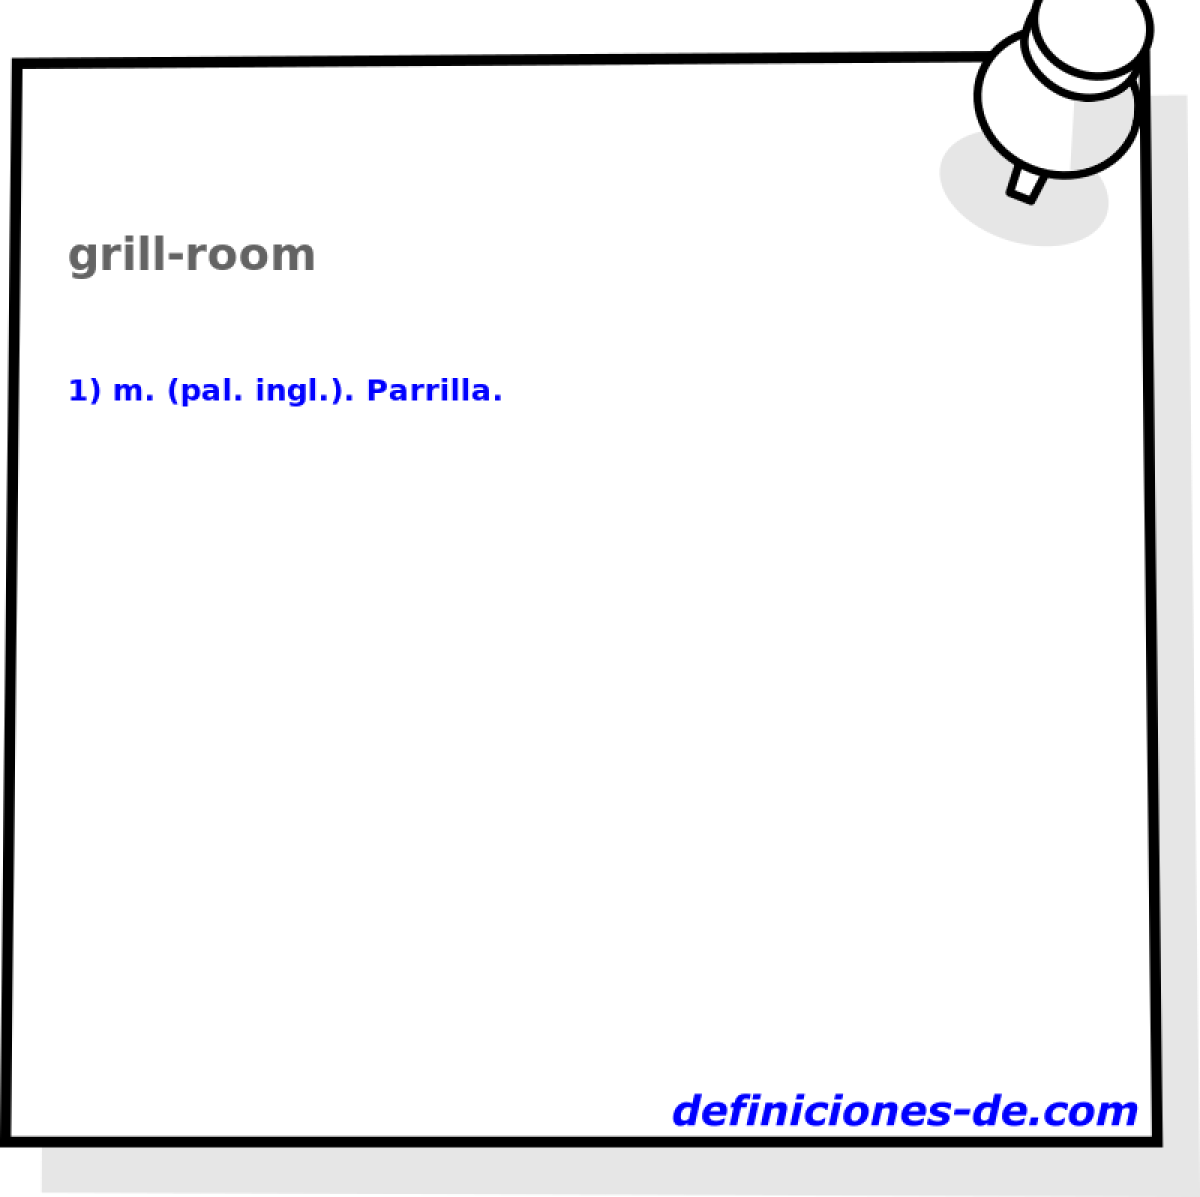 grill-room 